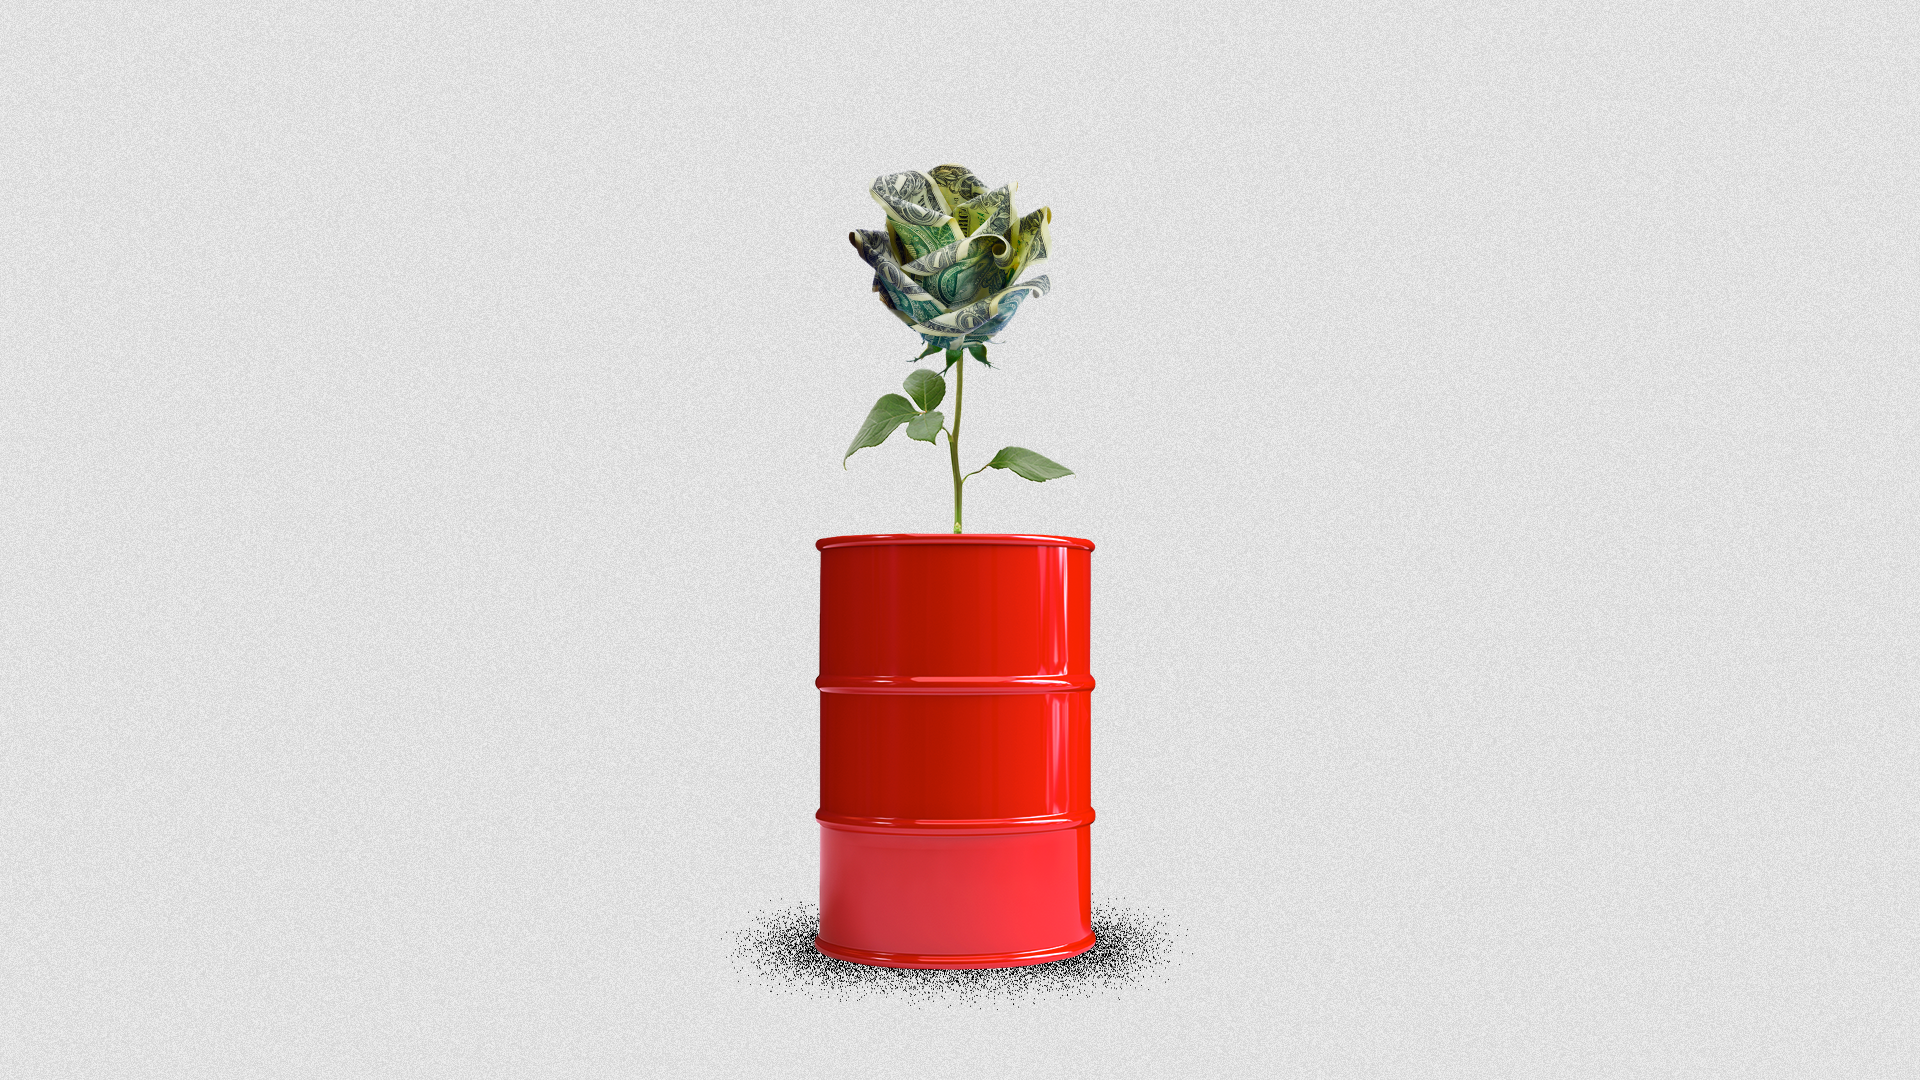 Illustration of an oil barrel with a flower made of cash growing out of it.